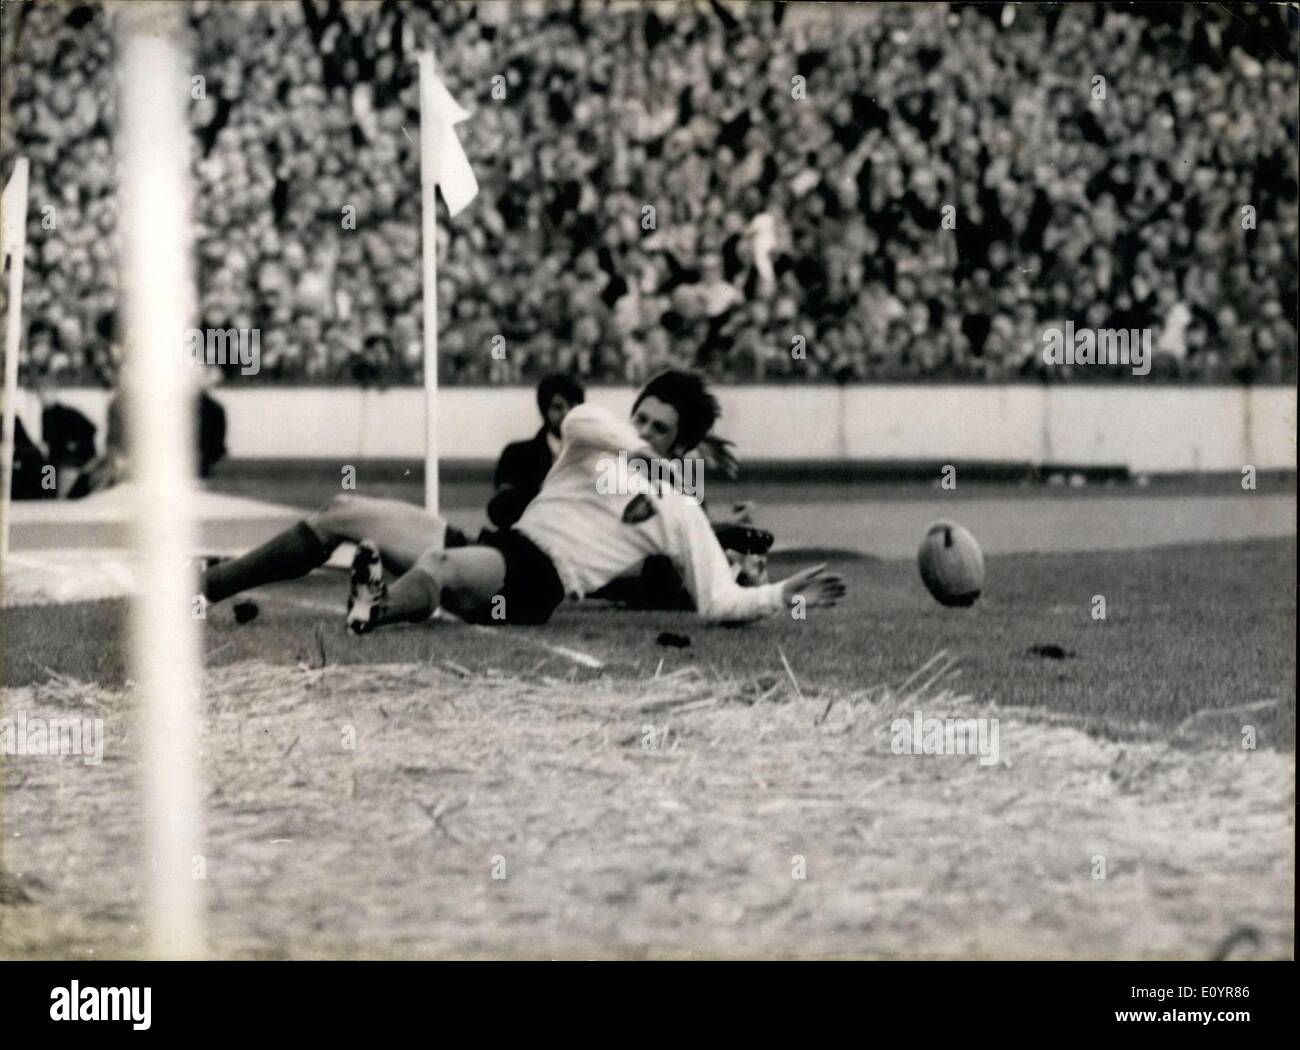 Mar. 27, 1971 - Welch Captain, Edwards Attempt a Goal Stock Photo